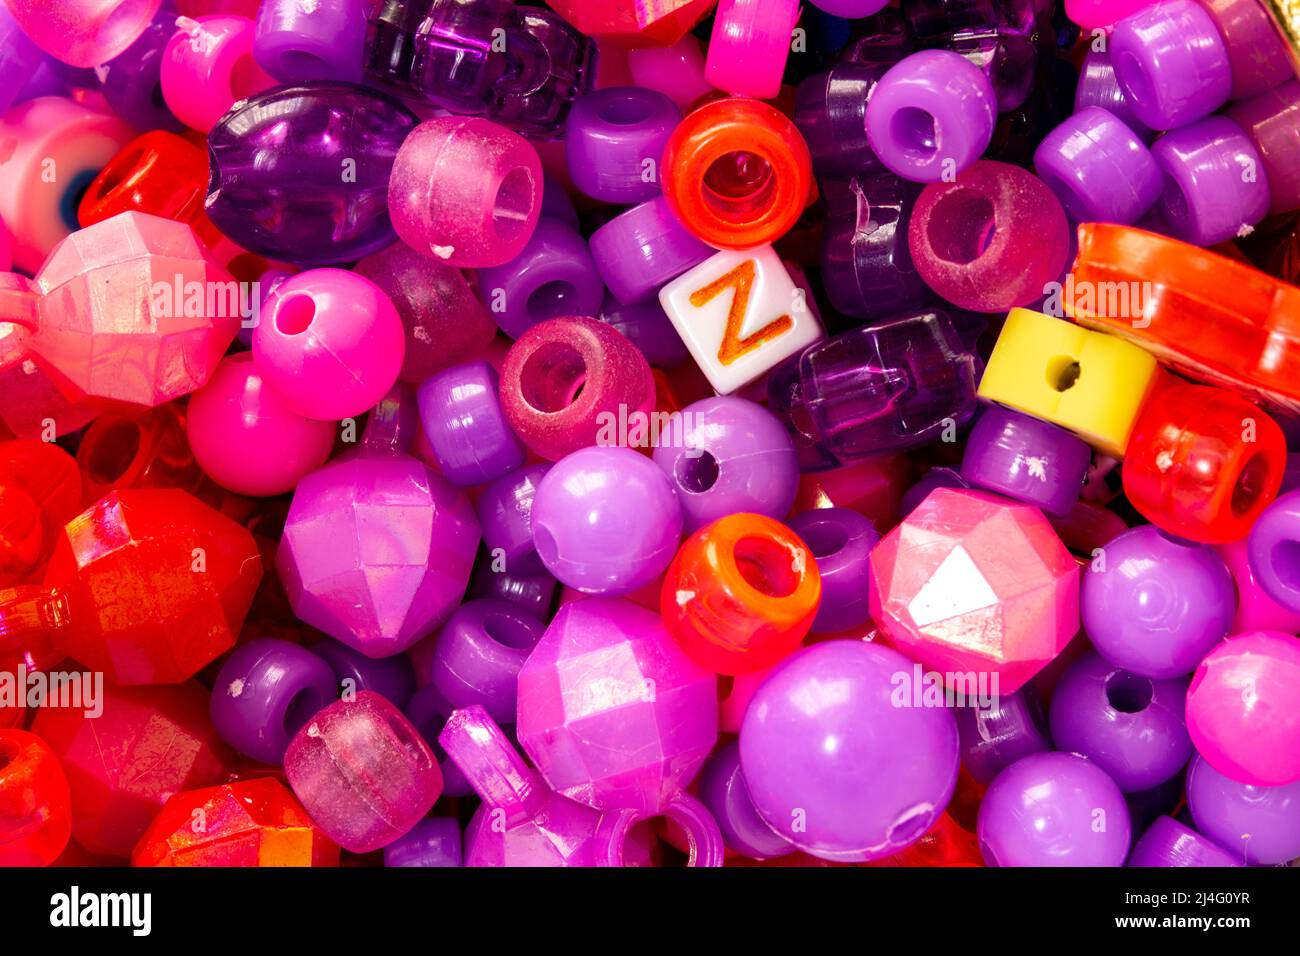 White cube with the letter Z on it among plastic beads of different colors and shapes. Generation Z concept. Stock Photo